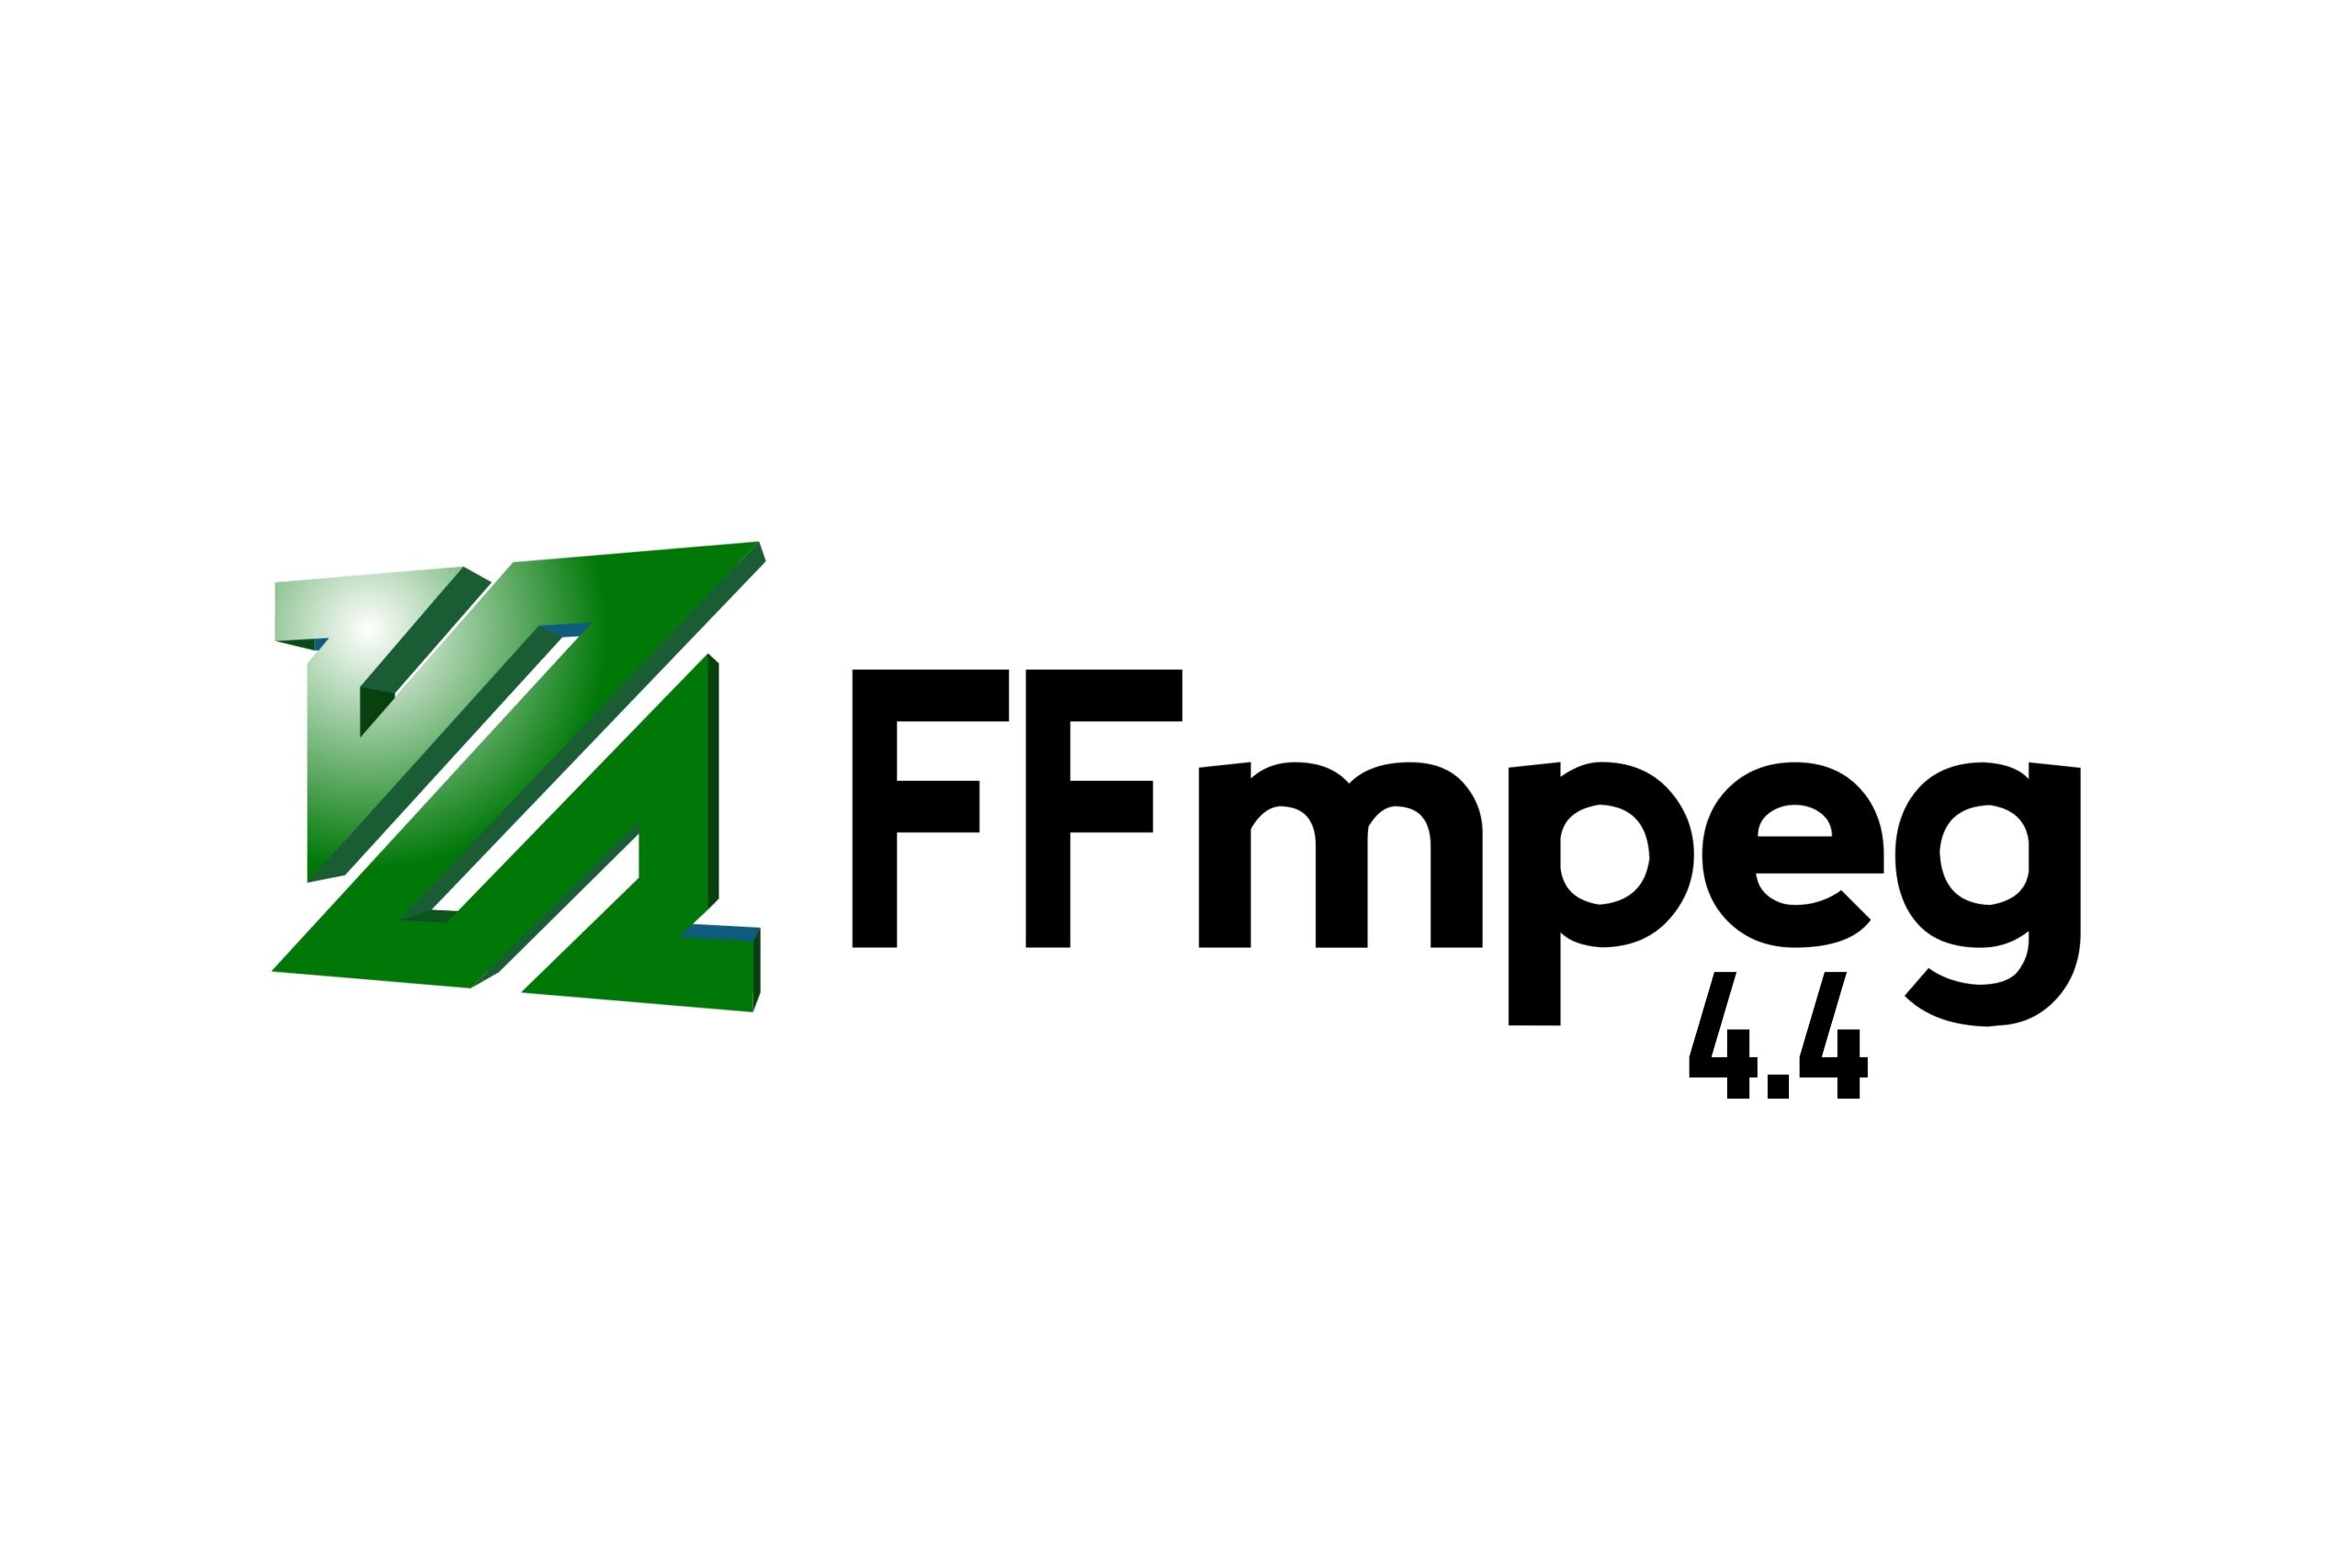 FFmpeg 4.4 Released with Hardware Accelerated AV1 Decoding, VDPAU Accelerated HEVC and VP9 Decoding